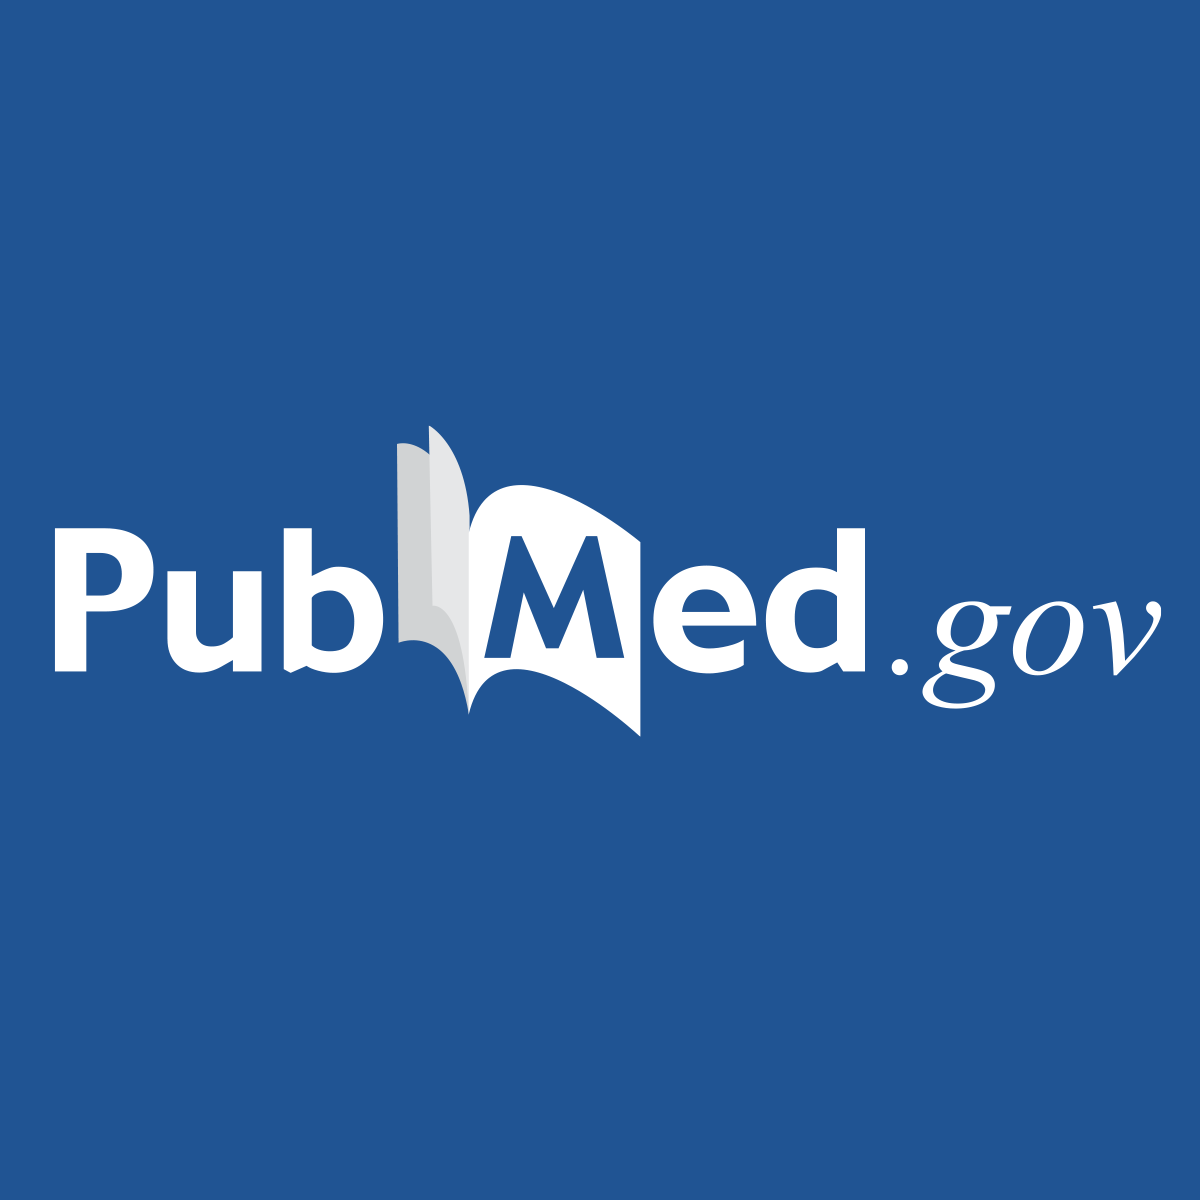 Multicenter randomized controlled trial to evaluate the efficacy and tolerability of frozen gloves for the prevention of chemotherapy-induced peripheral neuropathy - PubMed